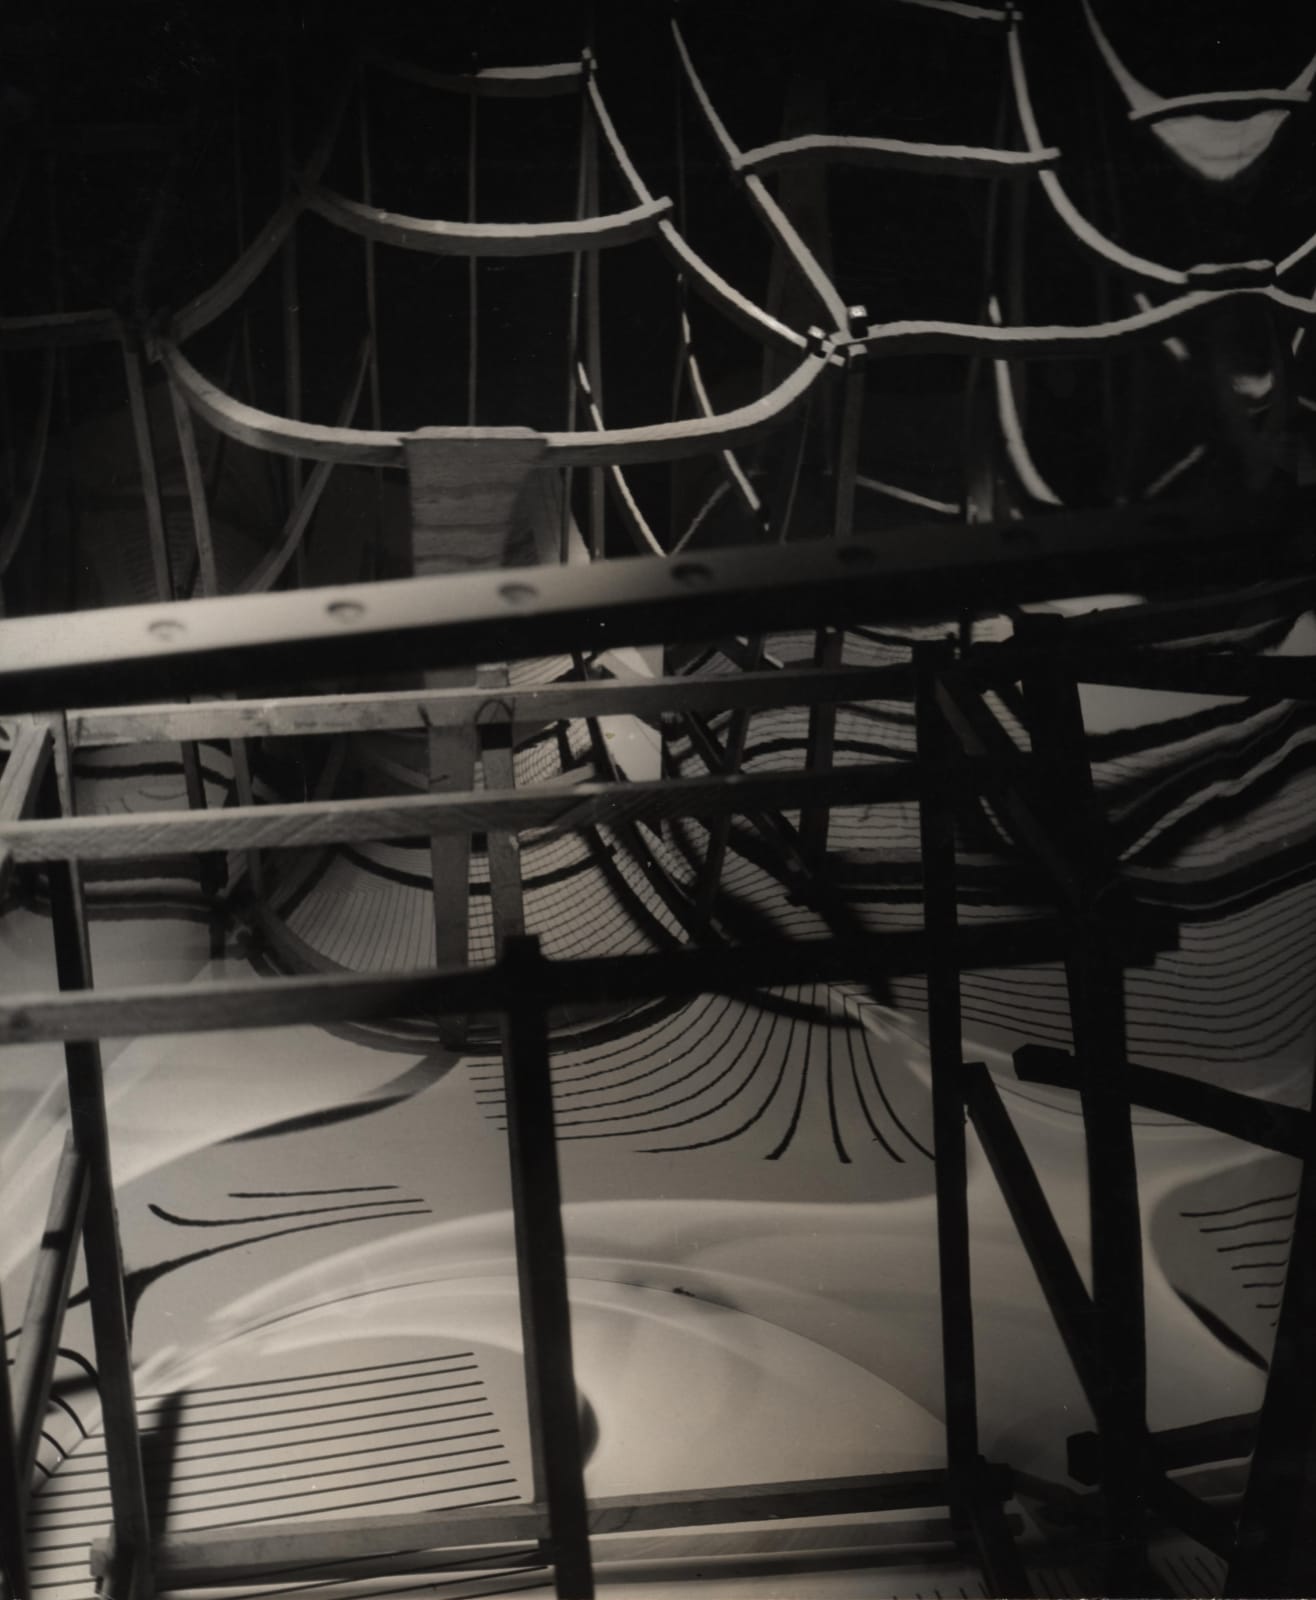 György Kepes, Mirrored Structure, 1941